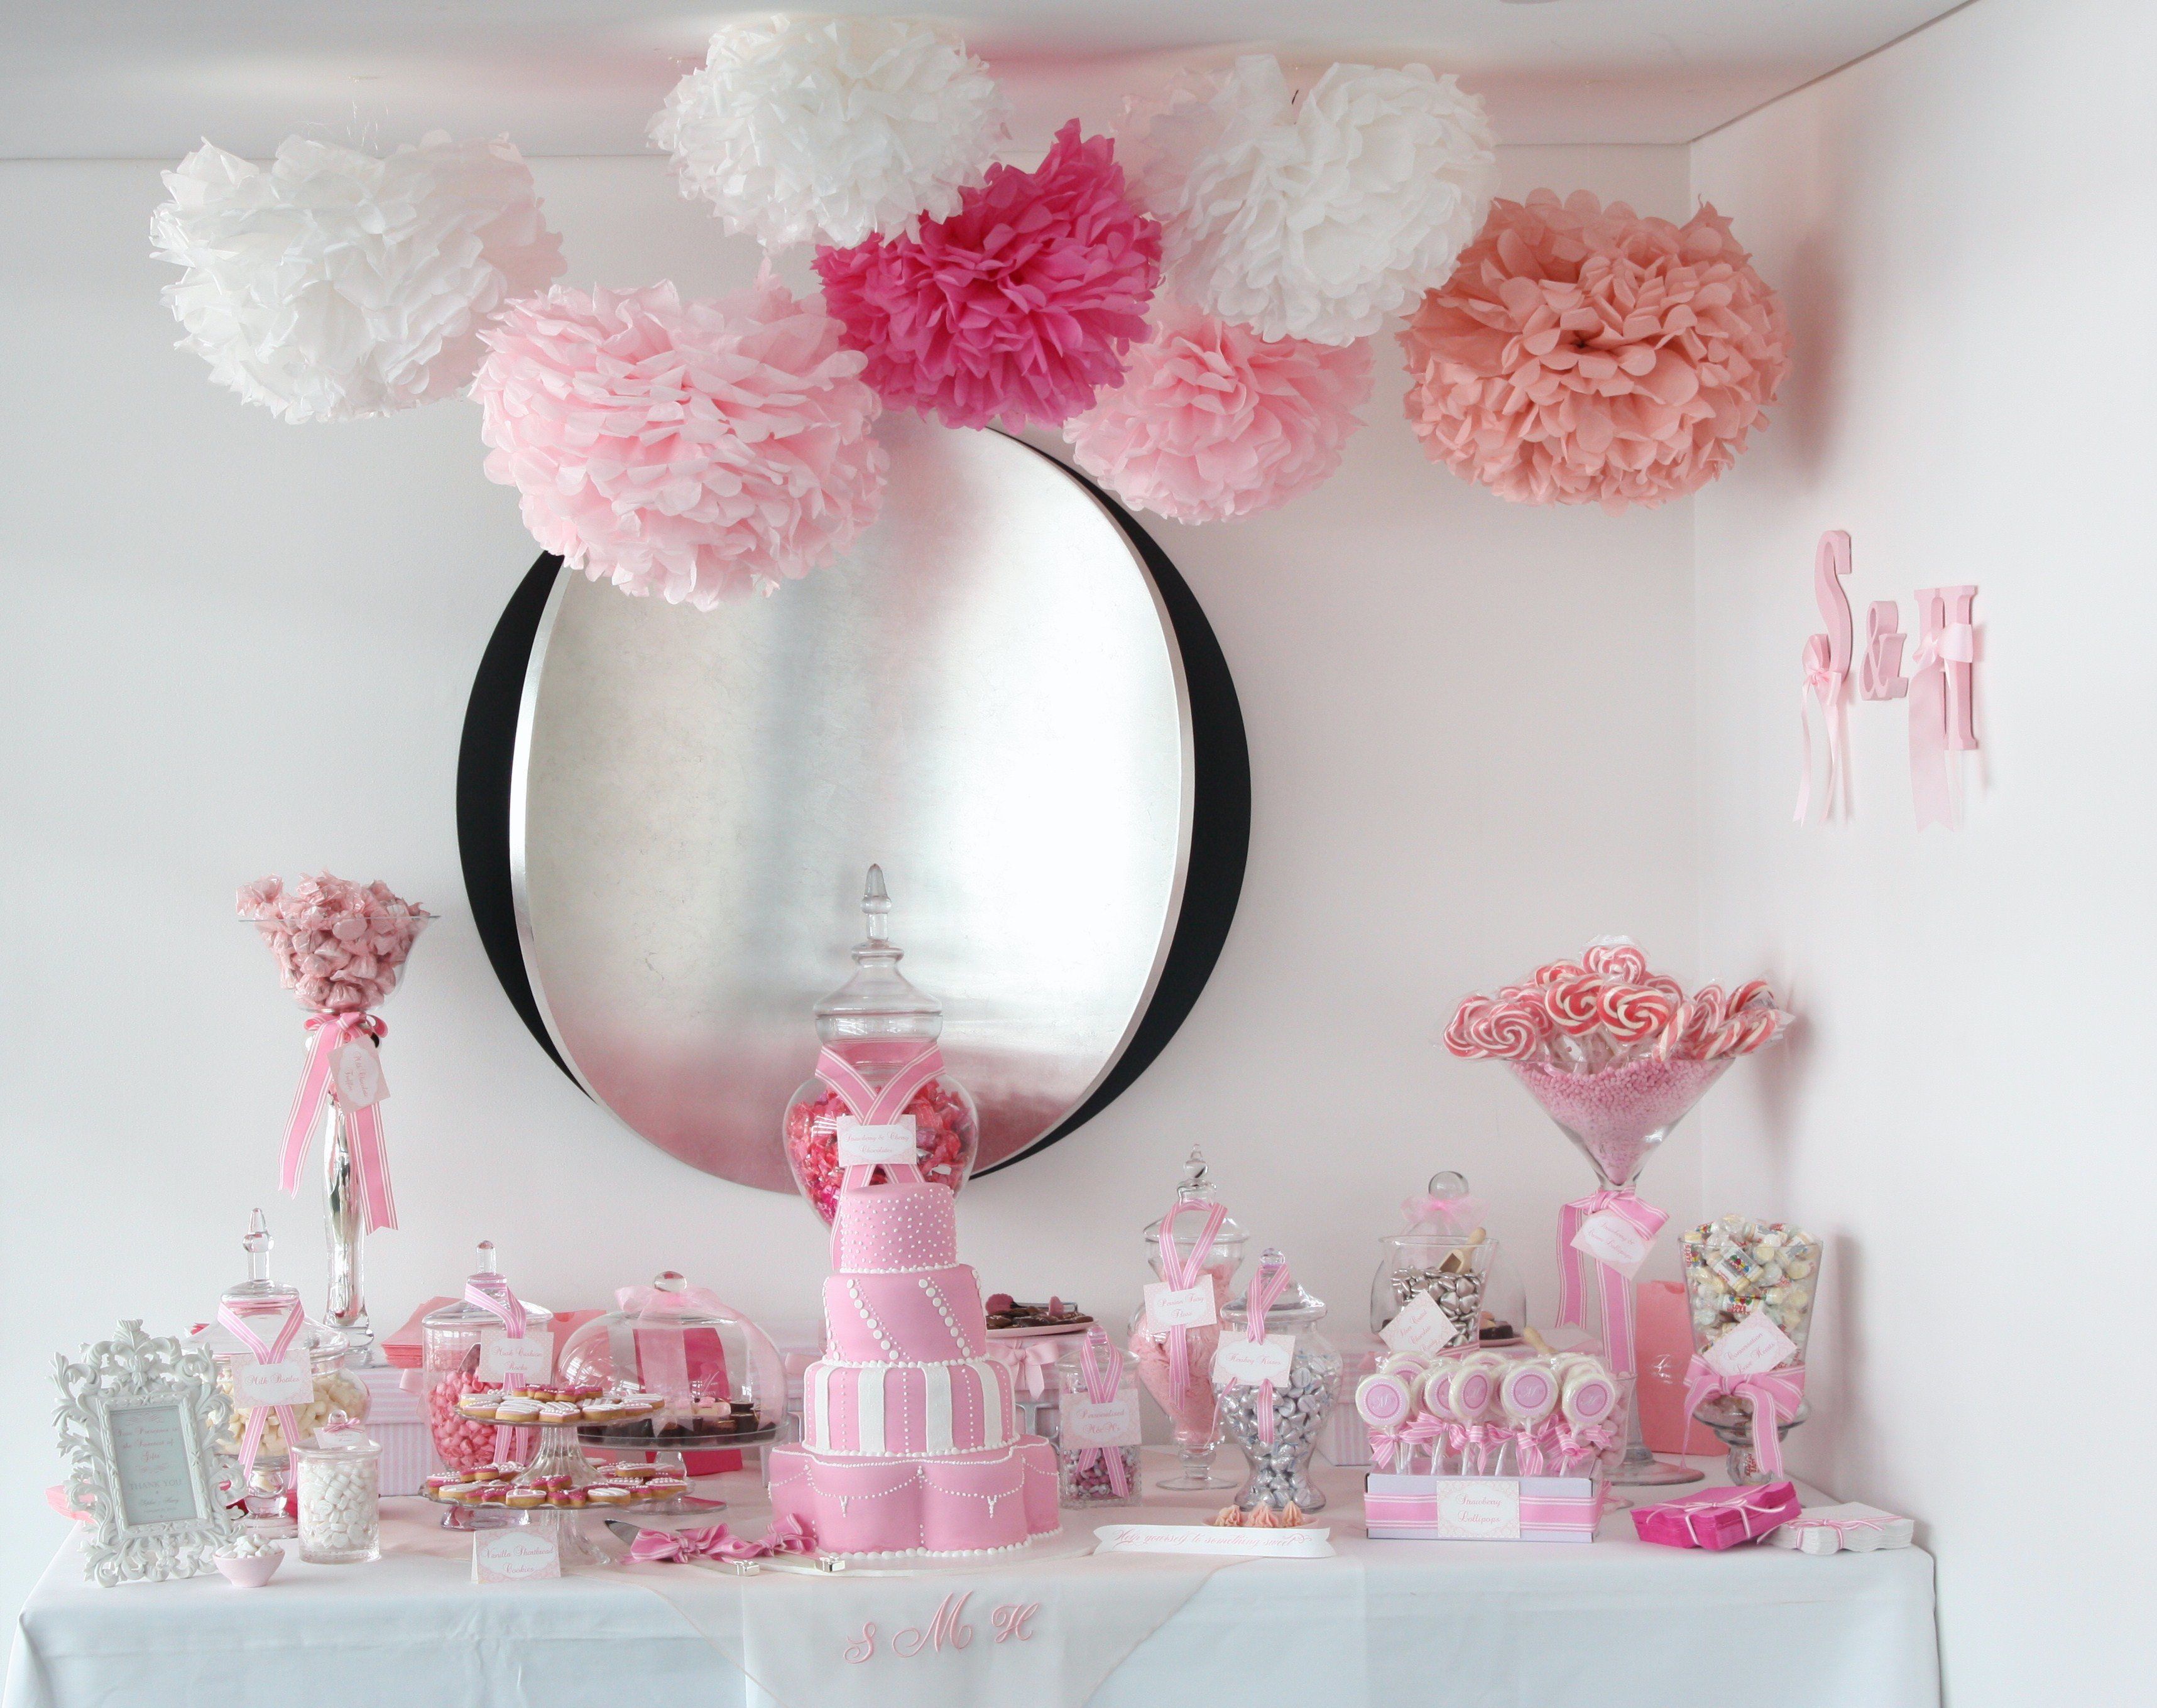 Sugarcoated Pink And White Candy Buffet – The Sweetest Occasion Inside Pink And White Geometric Buffets (View 4 of 30)